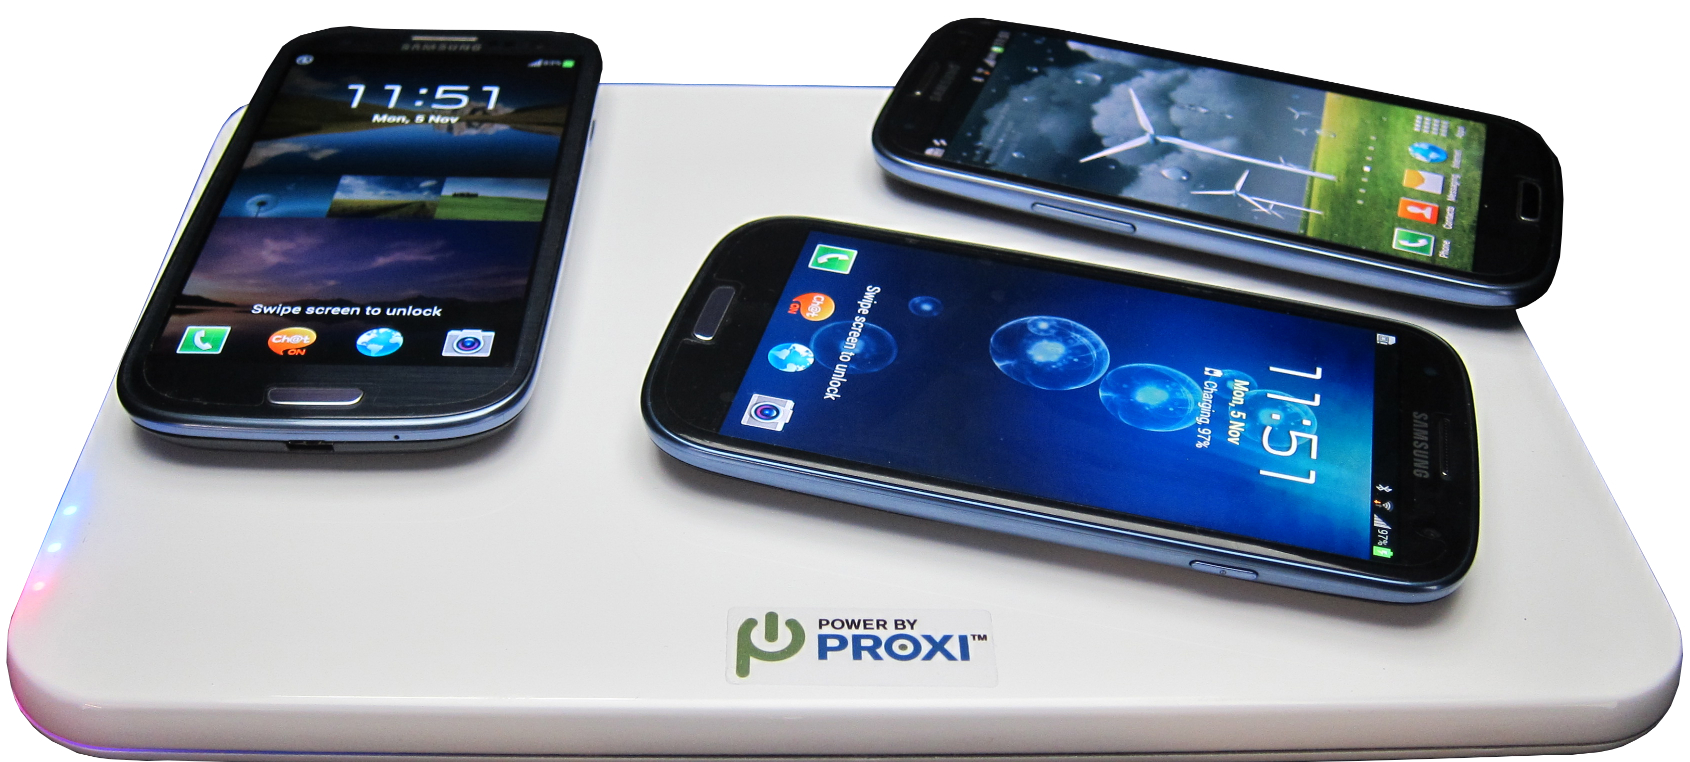 PowerByProxi Charges your Phone Wirelessly and Samsung Invested $4 Million in it